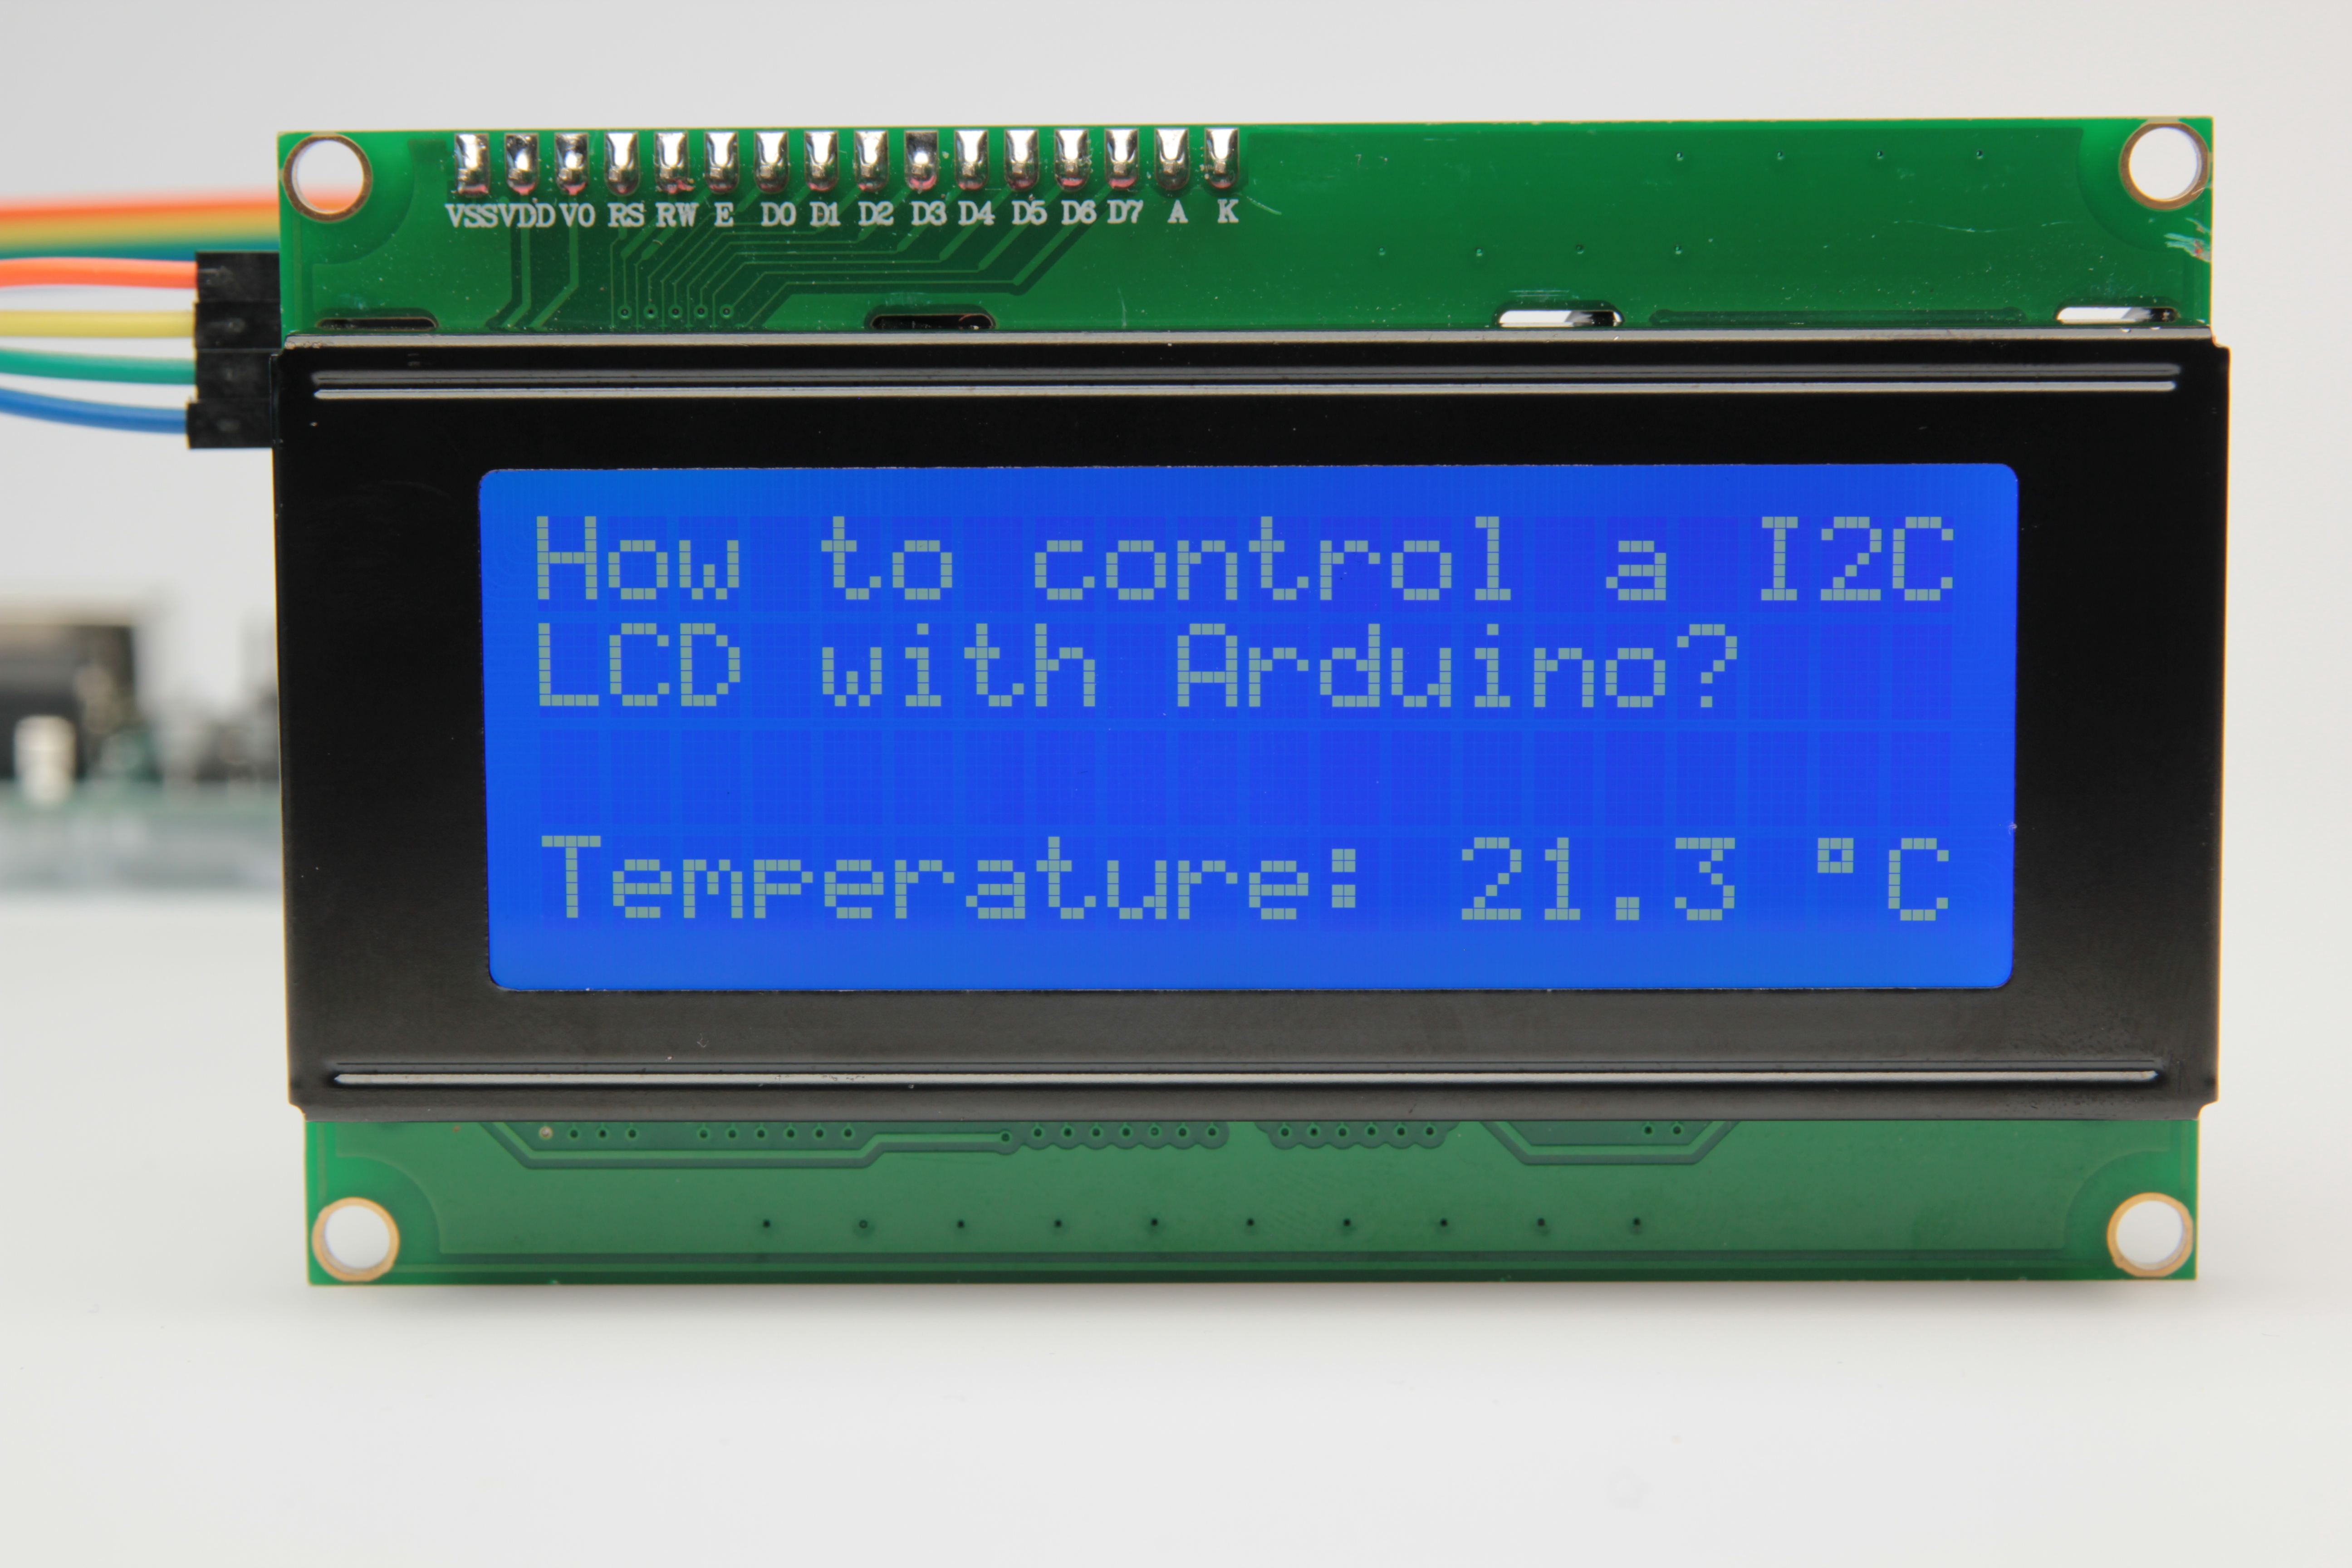 Using a 16x2 lcd display with a raspberry pi youtube.